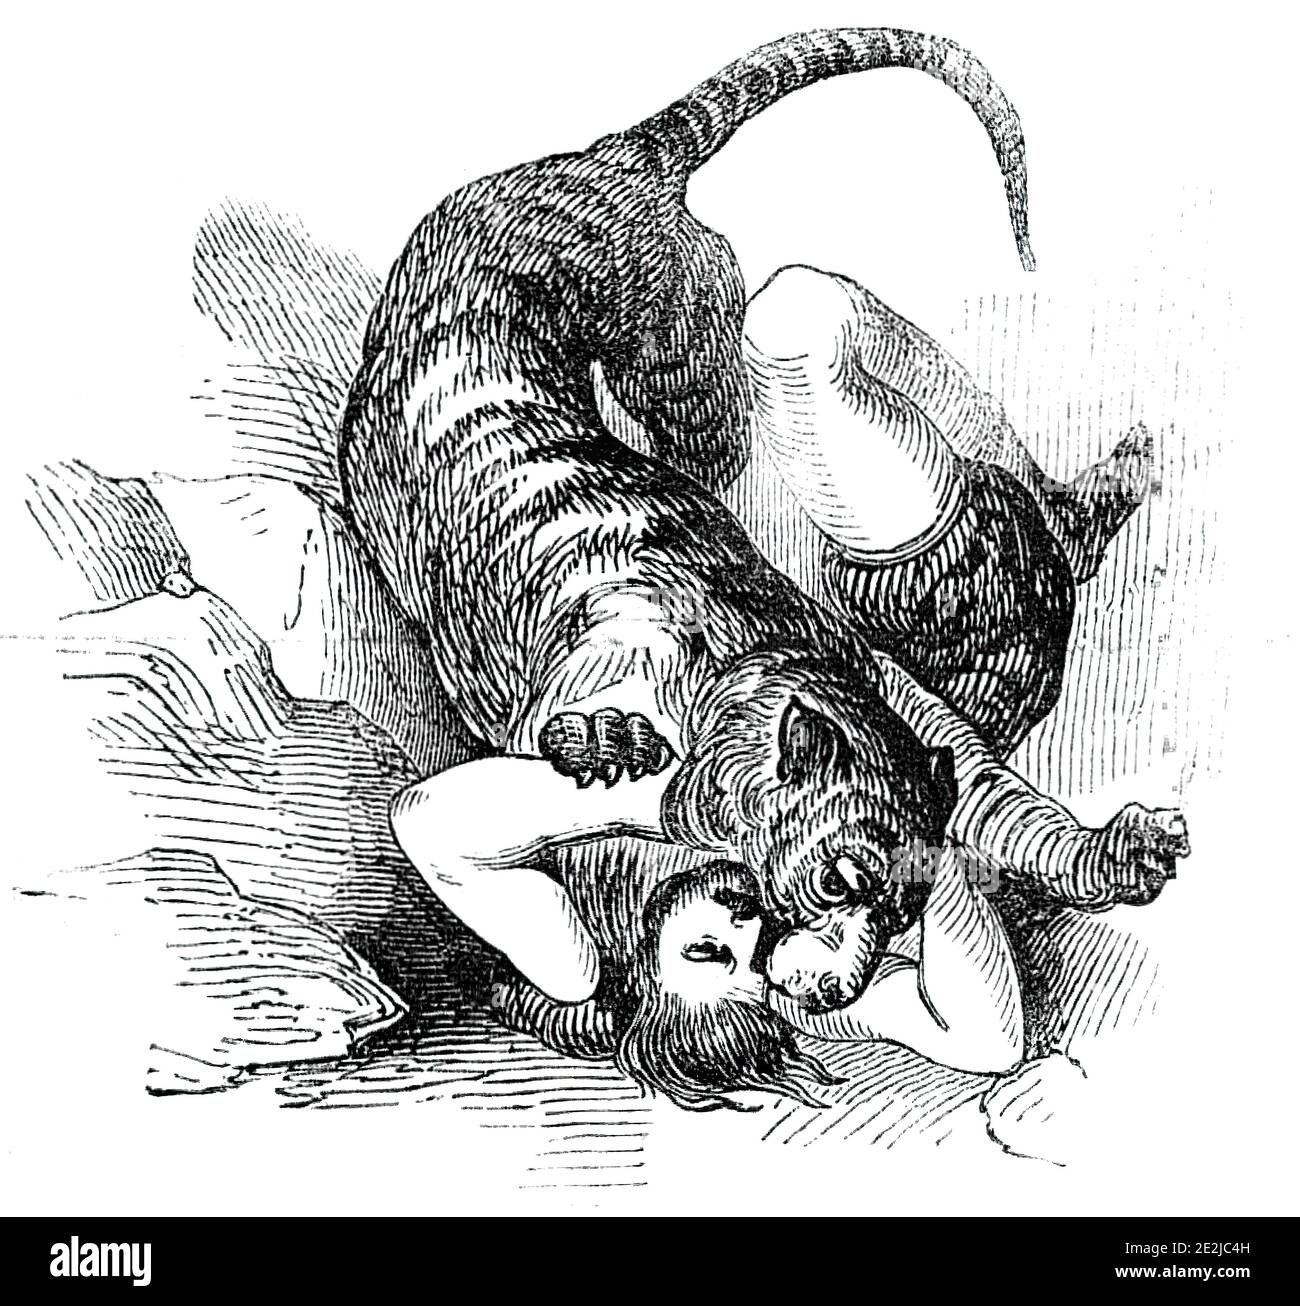 Carter's Tiger Feat, 1844. Circus act at Astley's Amphitheatre in London: 'Mr. Batty, the enterprising proprietor of this popular establishment, has recently added to its attractions, a spectacle entitled Mungo Park, in which Mr. Carter as &quot;Karfa, the Lion Tamer of the Niger&quot;, introduces many extraordinary feats with his trained troop of wild animals'.&#xa0;Here we see Mr. Carter, the American Lion King, '...gamboling with a fine tiger'.&#xa0;From &quot;Illustrated London News&quot;, 1844, Vol V. Stock Photo